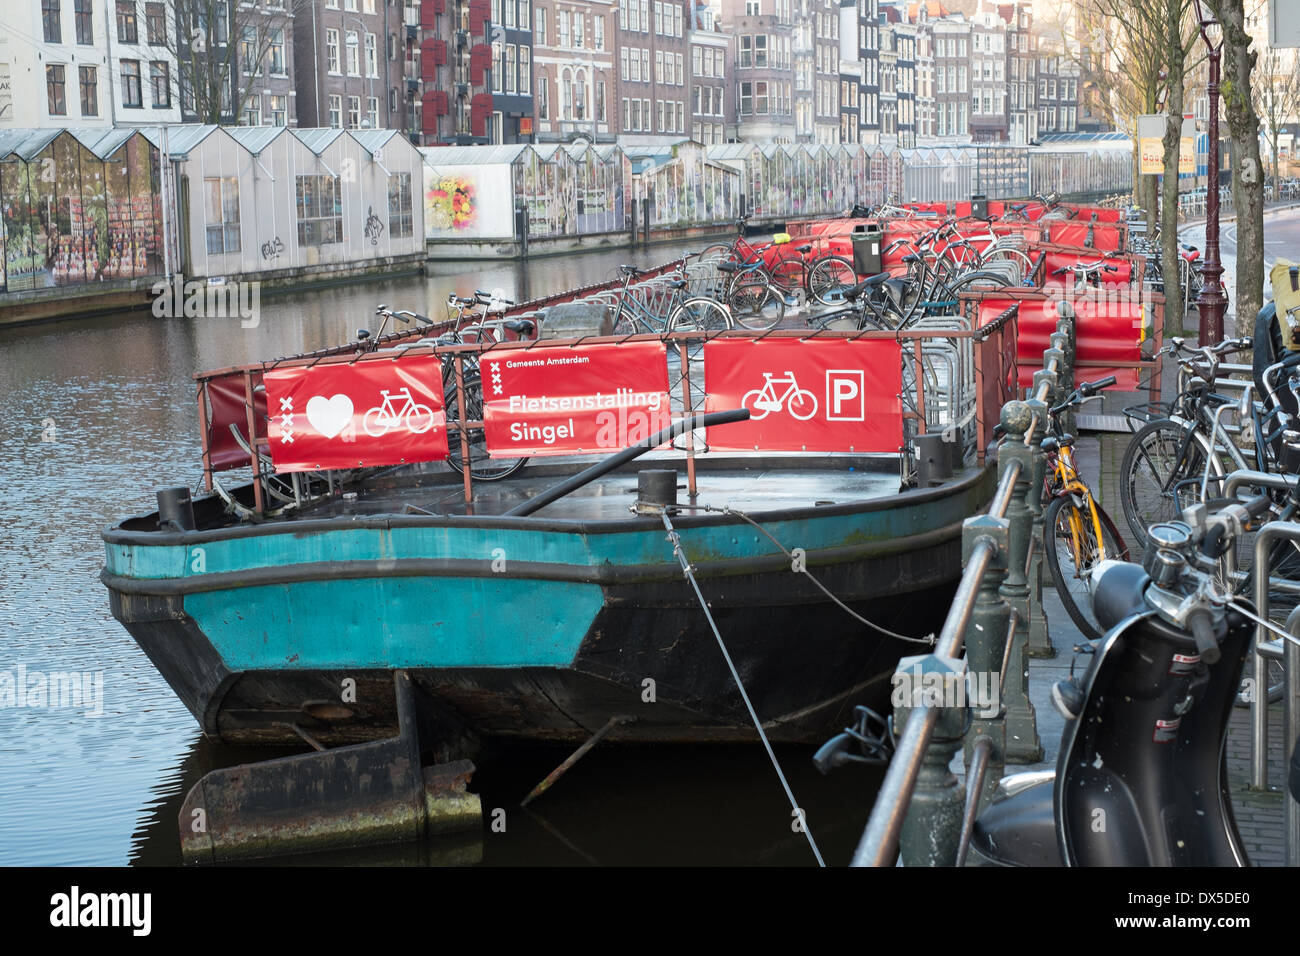 cycle park on a canal barge adjacent to flea market amsterdam netherlands Stock Photo